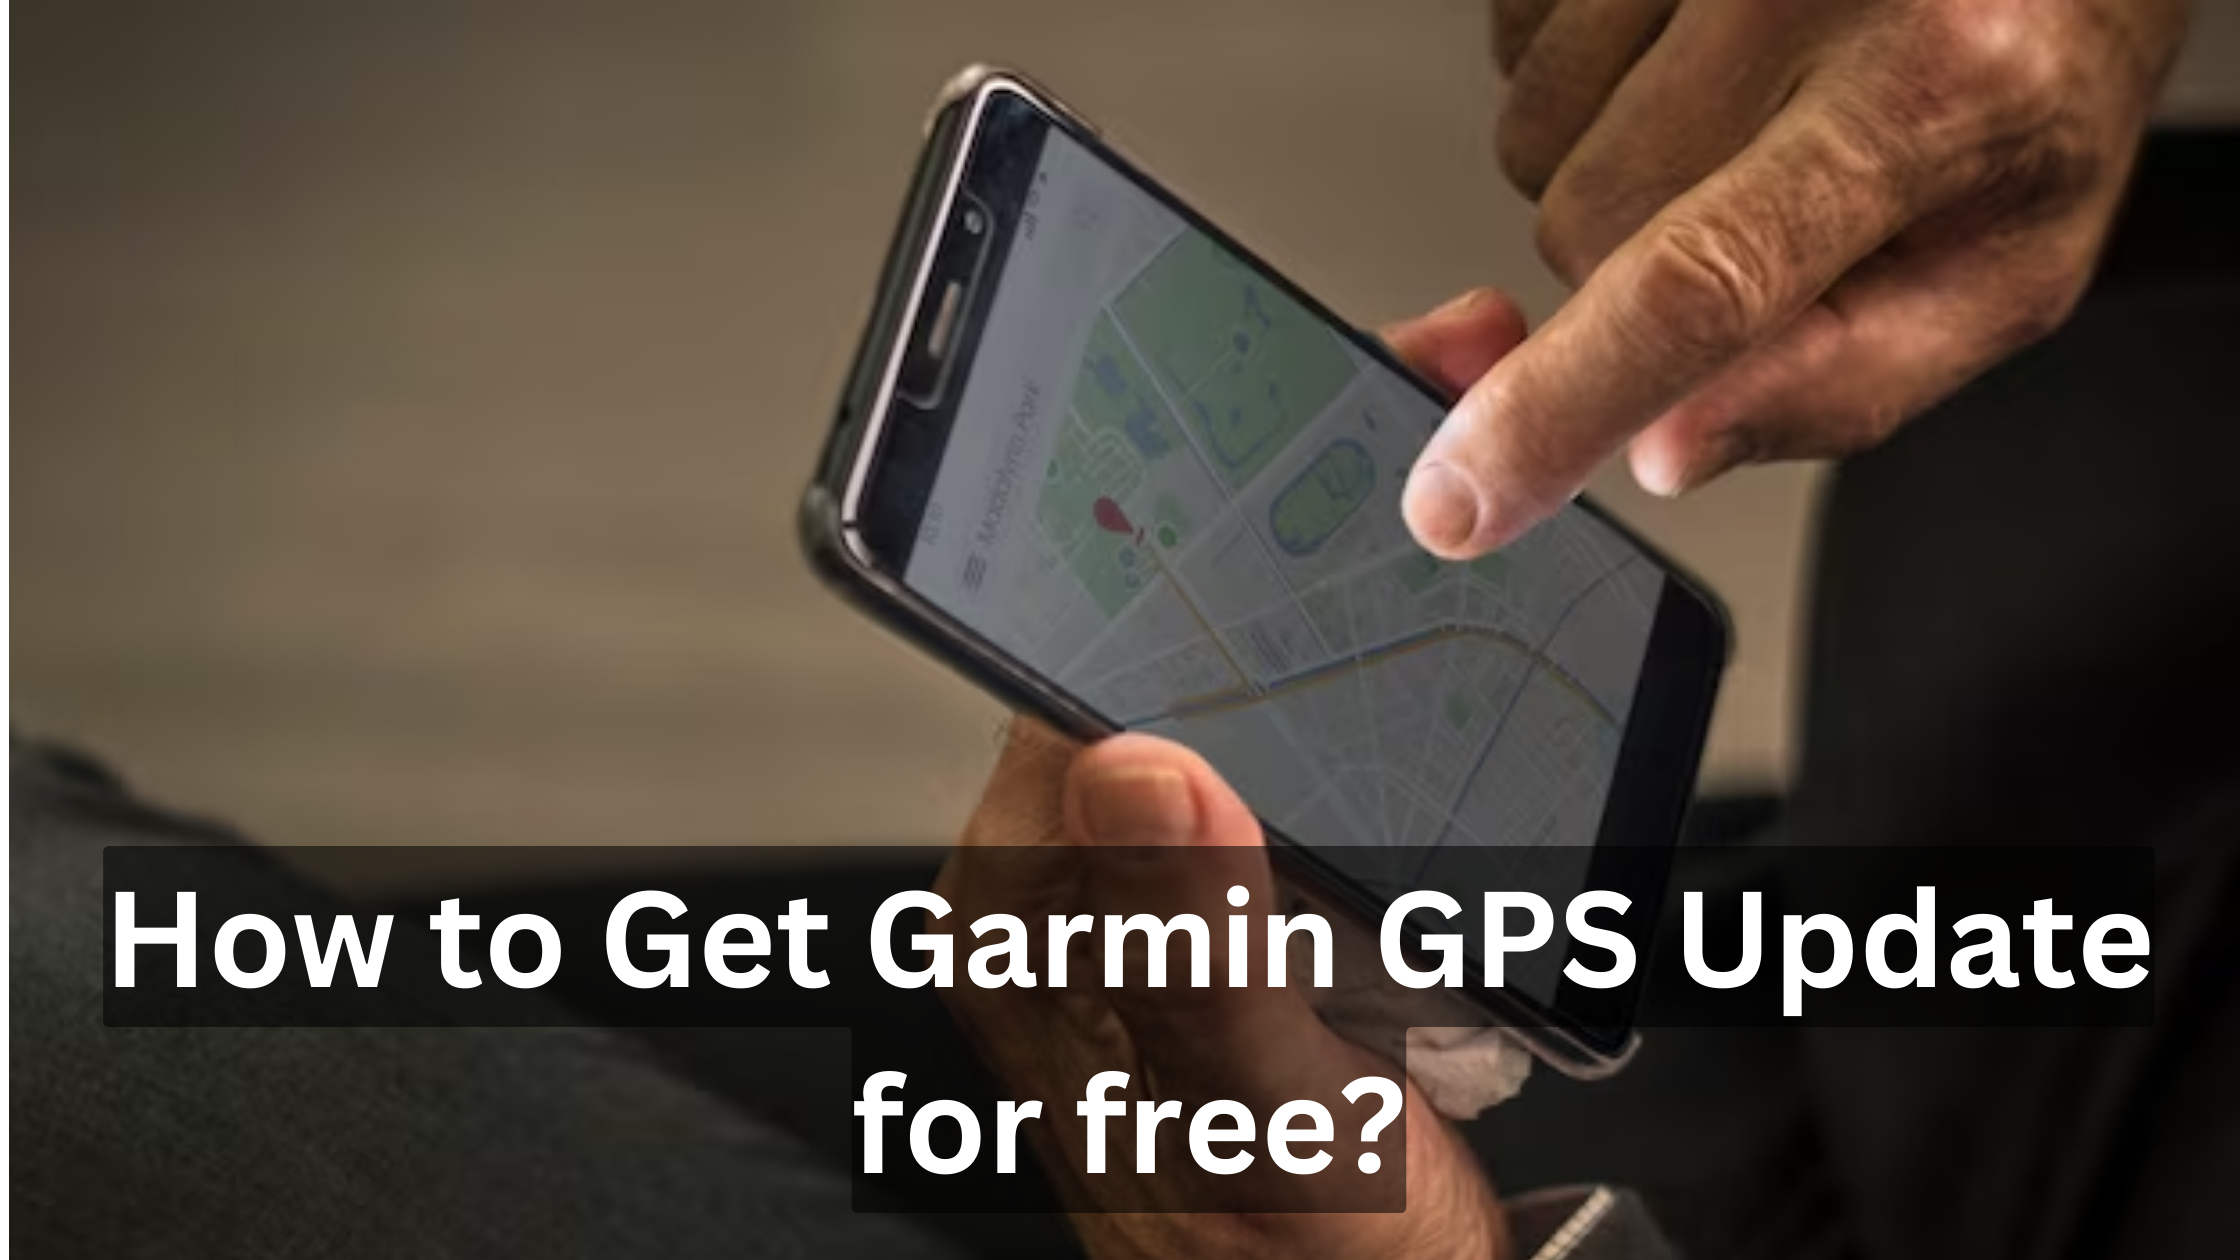 How to Get Garmin GPS Update for free?